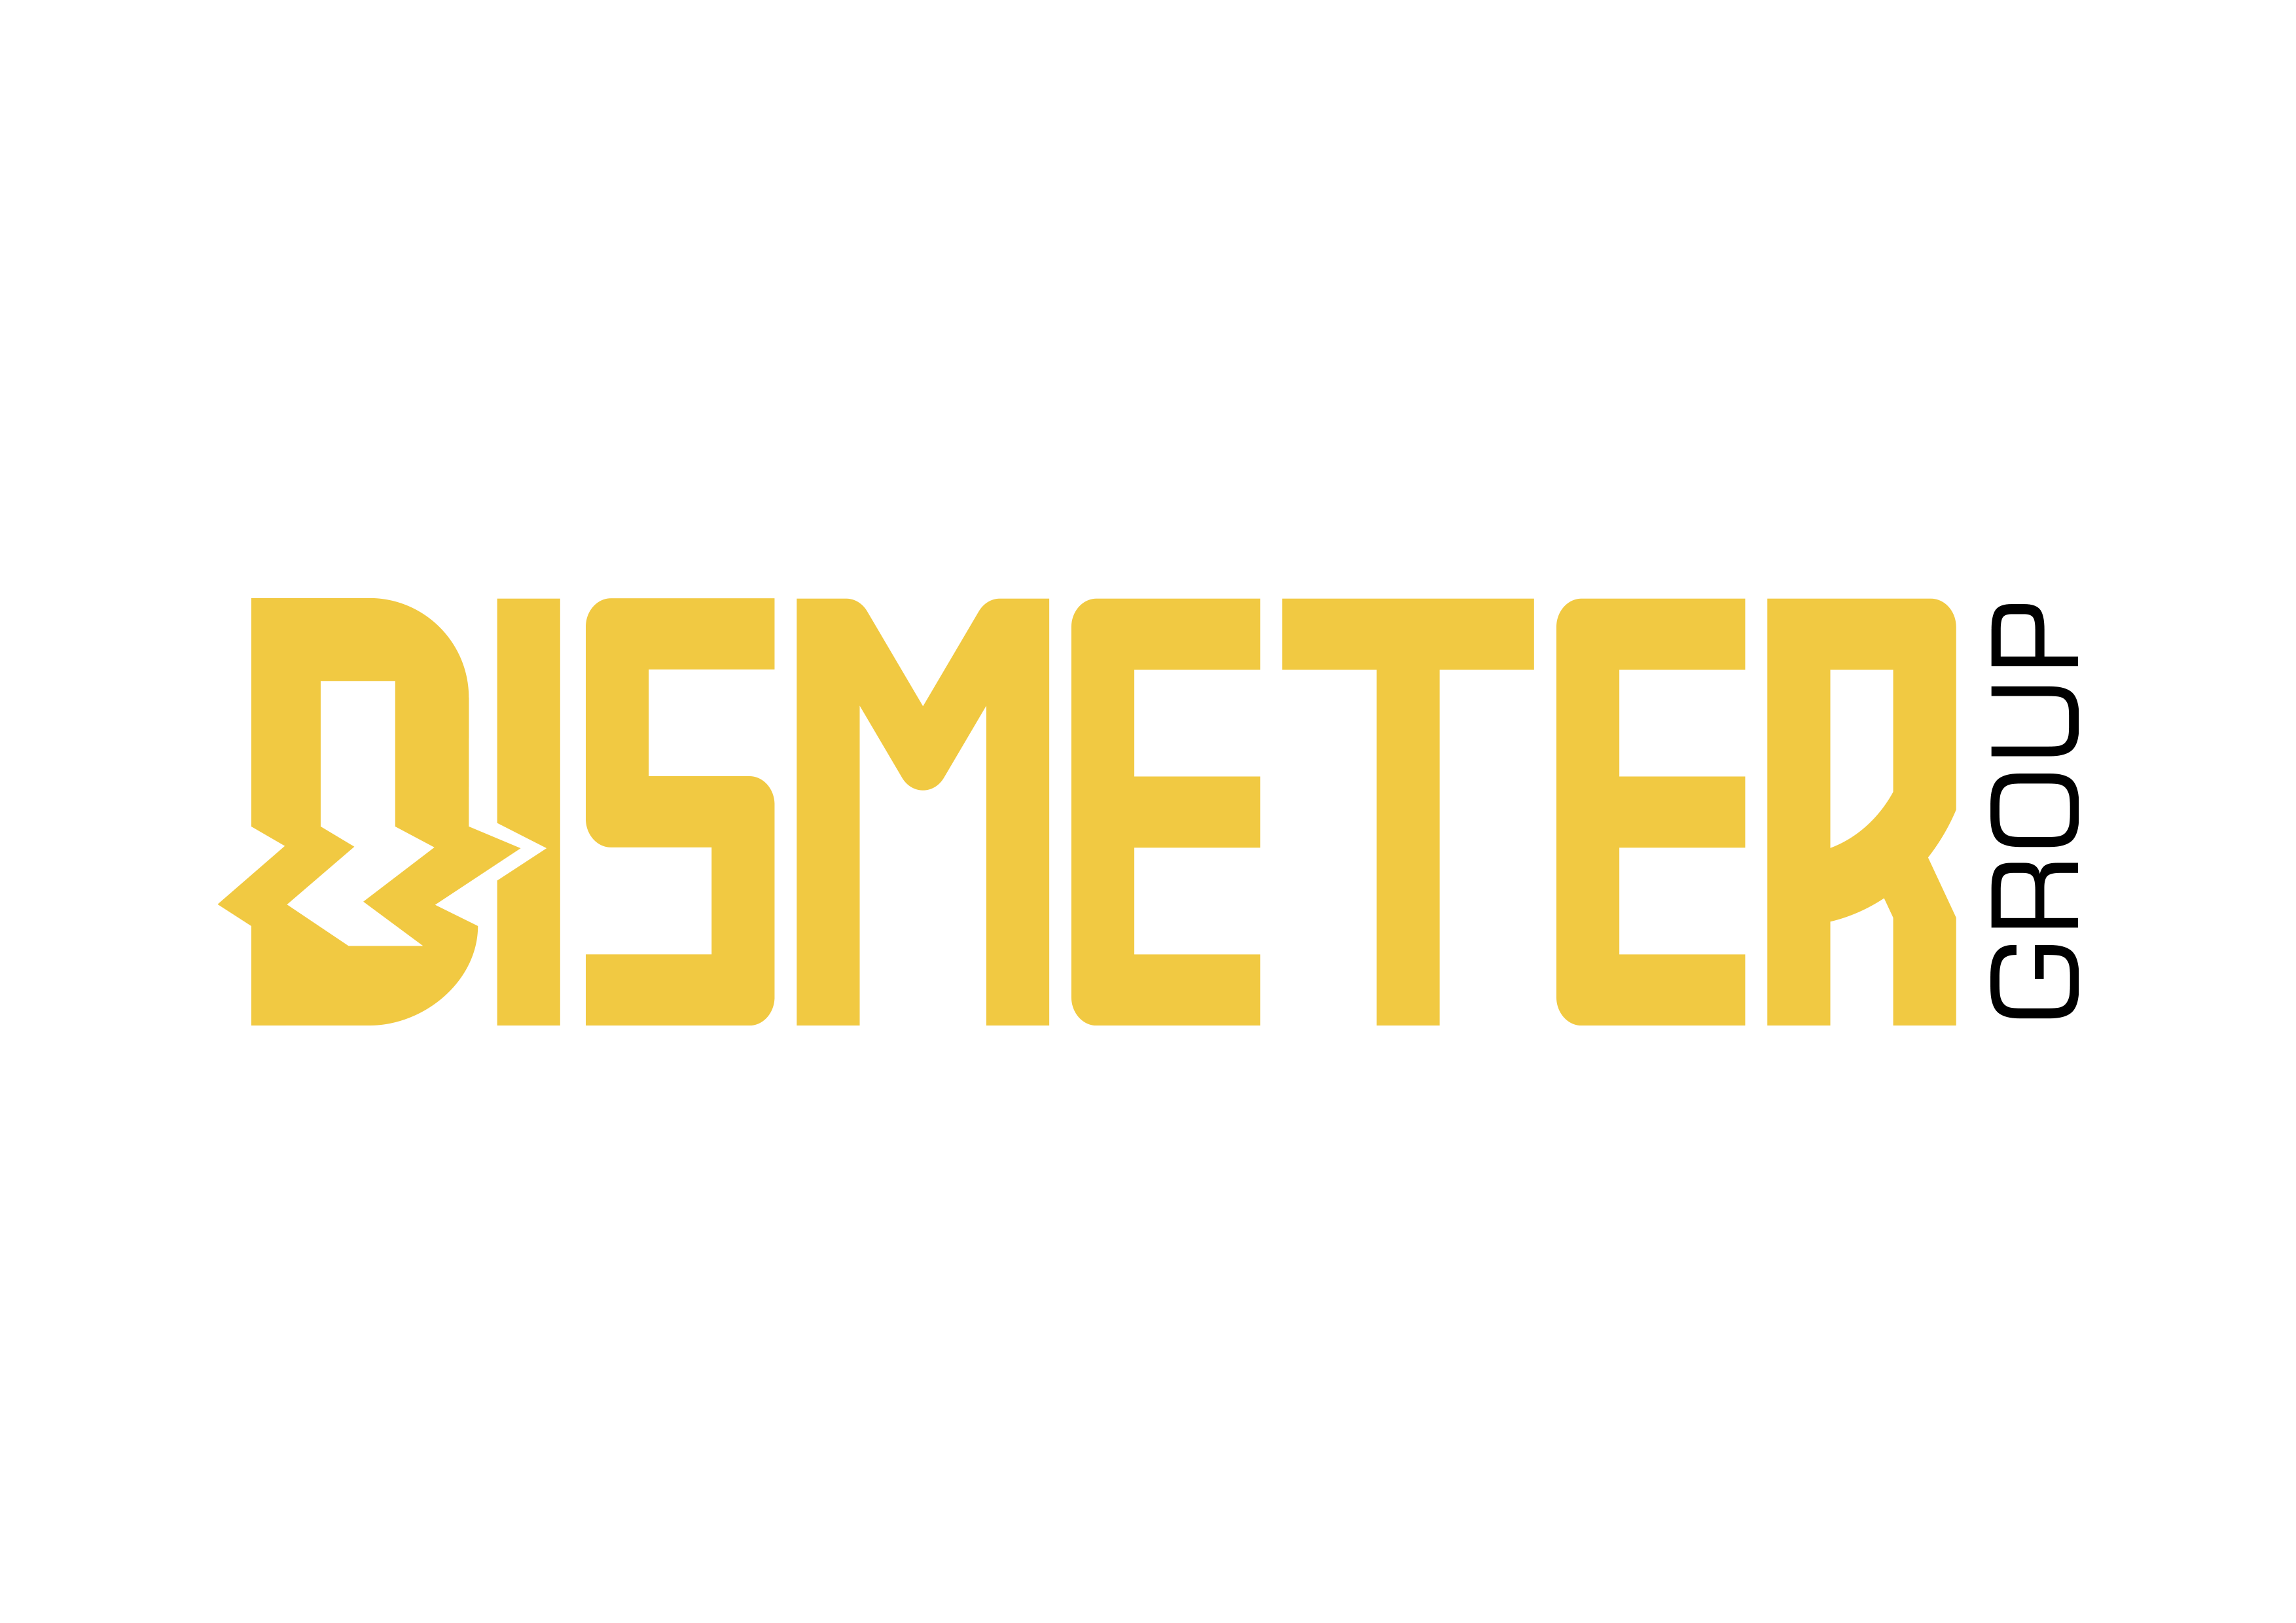 Dismeter Group